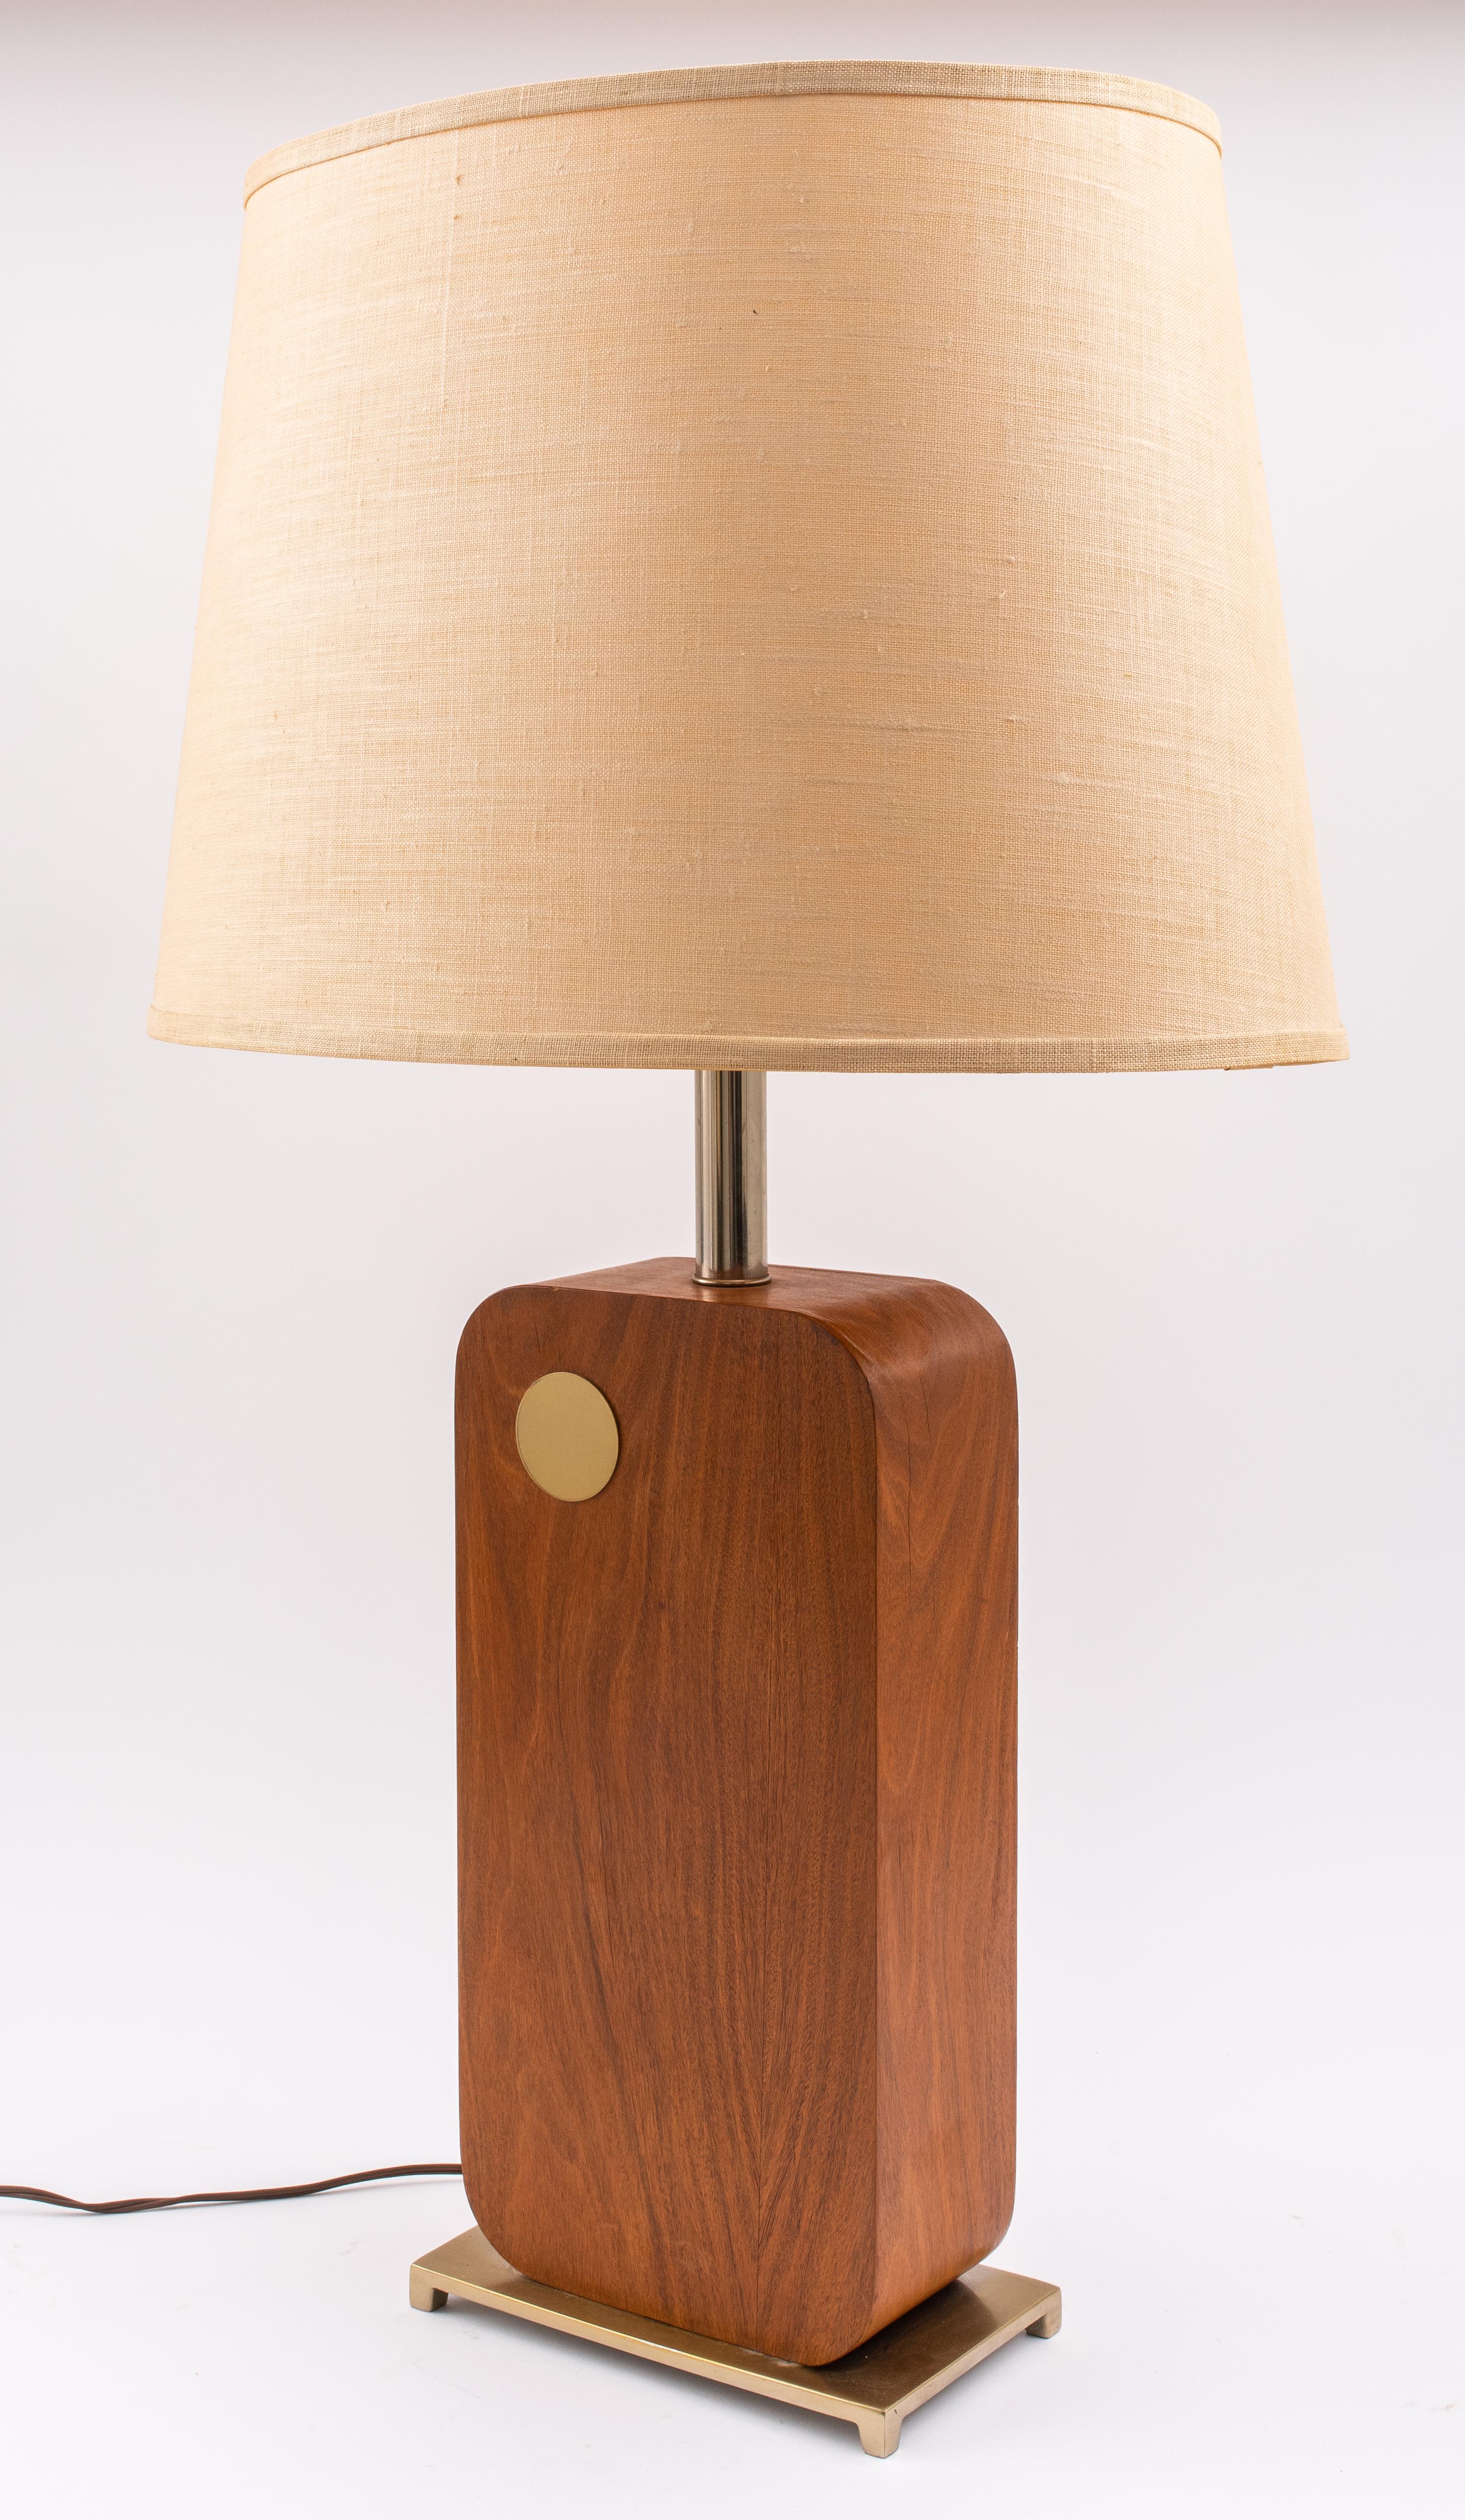 Mid-Century Modern table lamp by Laurel Lighting Company, the rectangular gilt brass base mounted by a wood rectangle with rounded edges and a gold-tone metal circle accent, with a beige linen shade, marked 